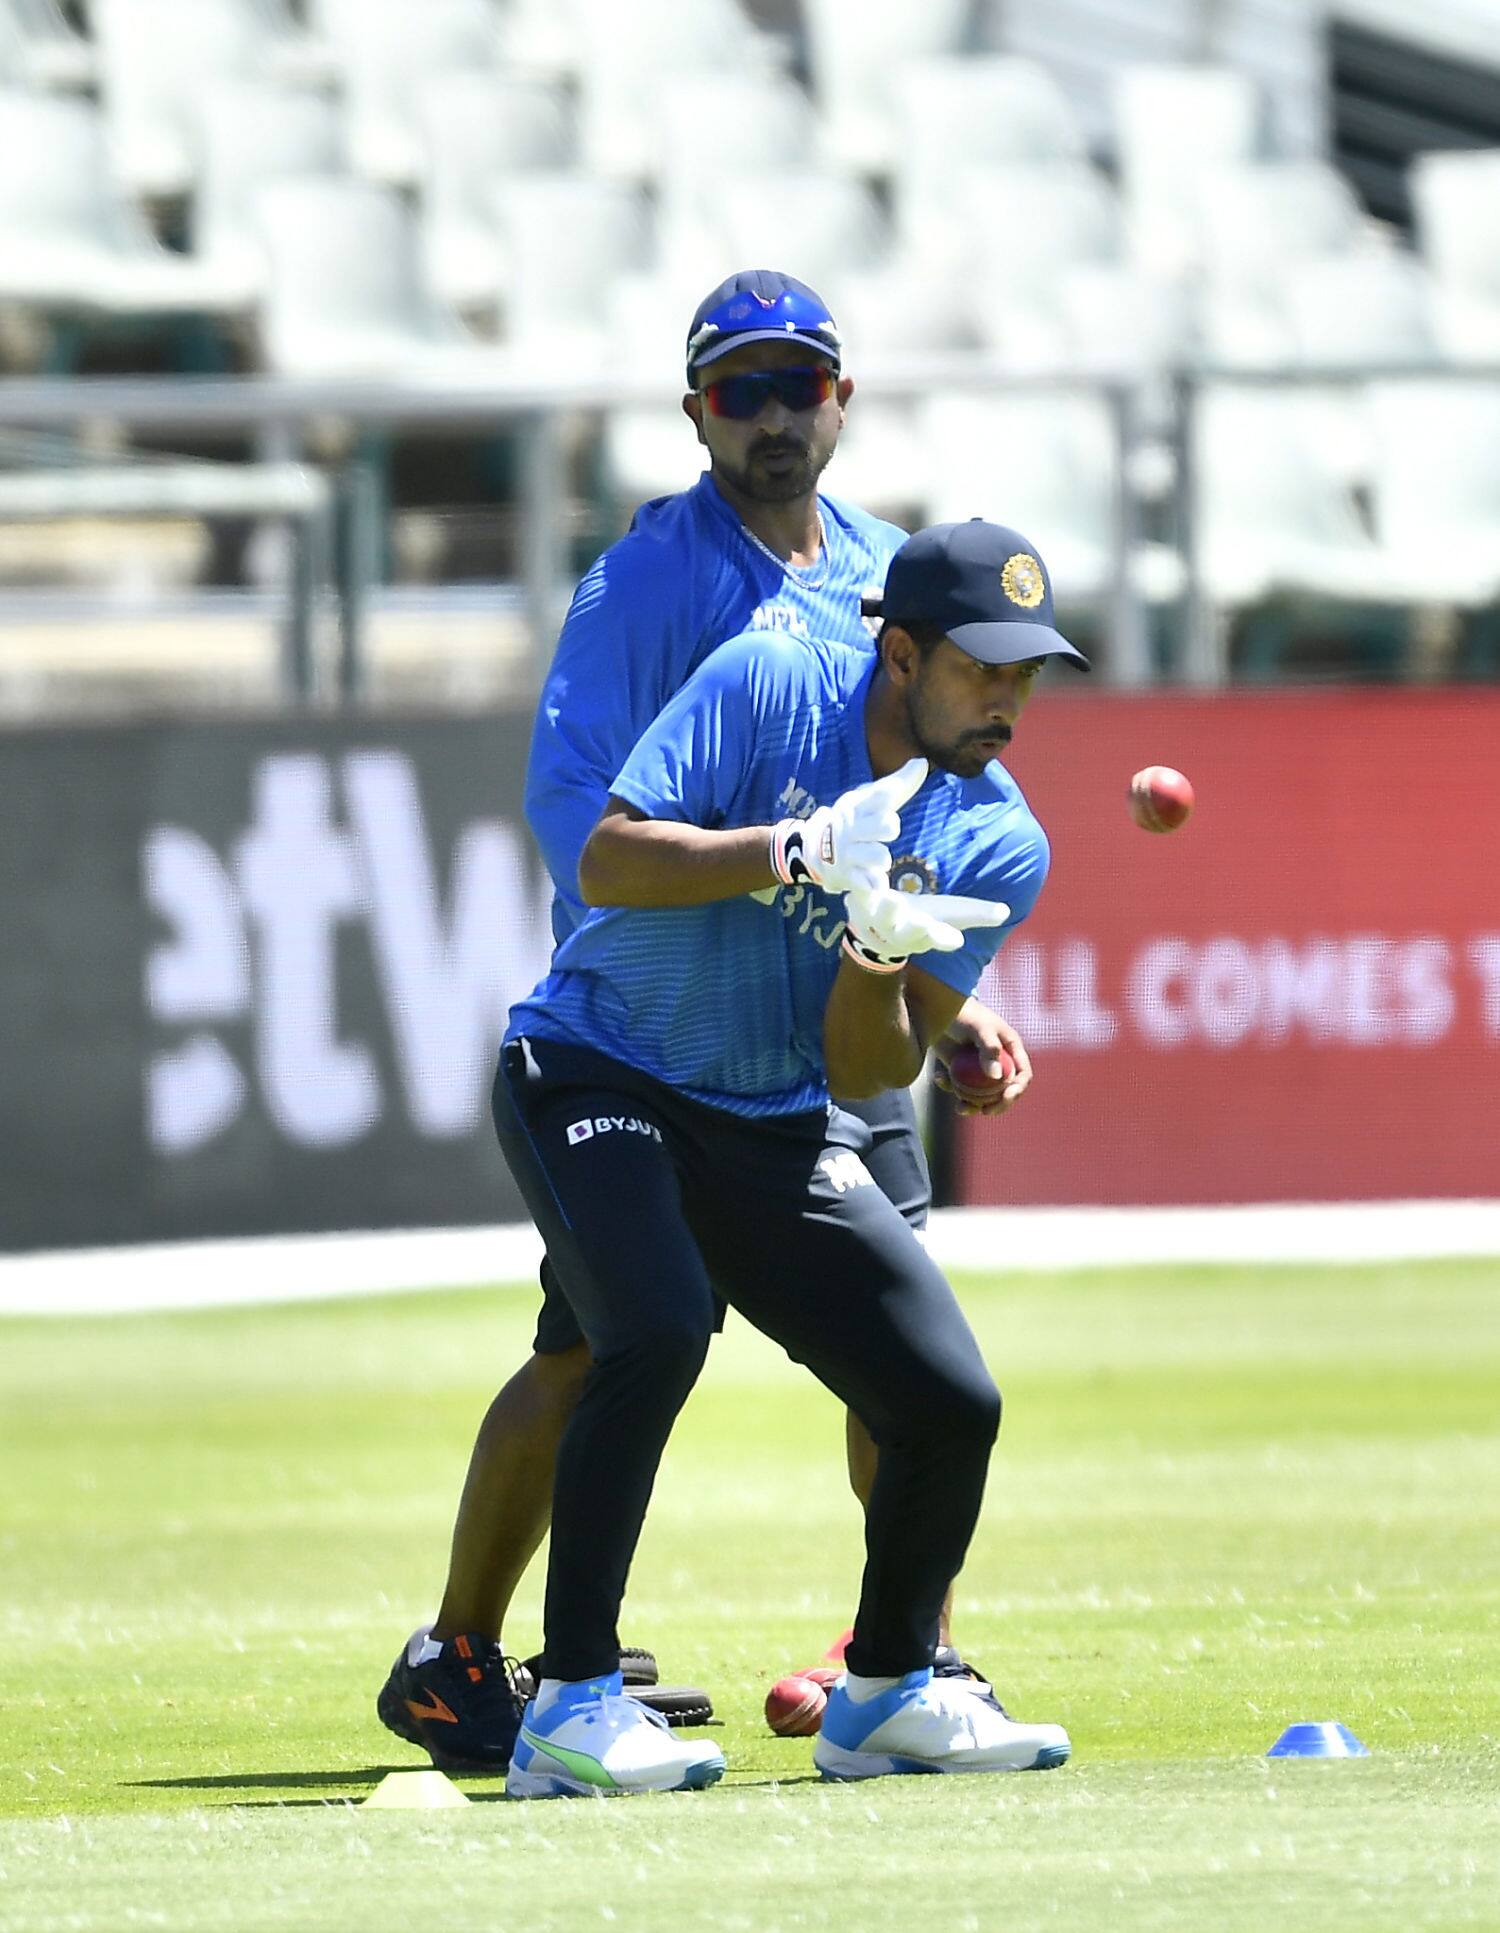 Saha in for Pant?